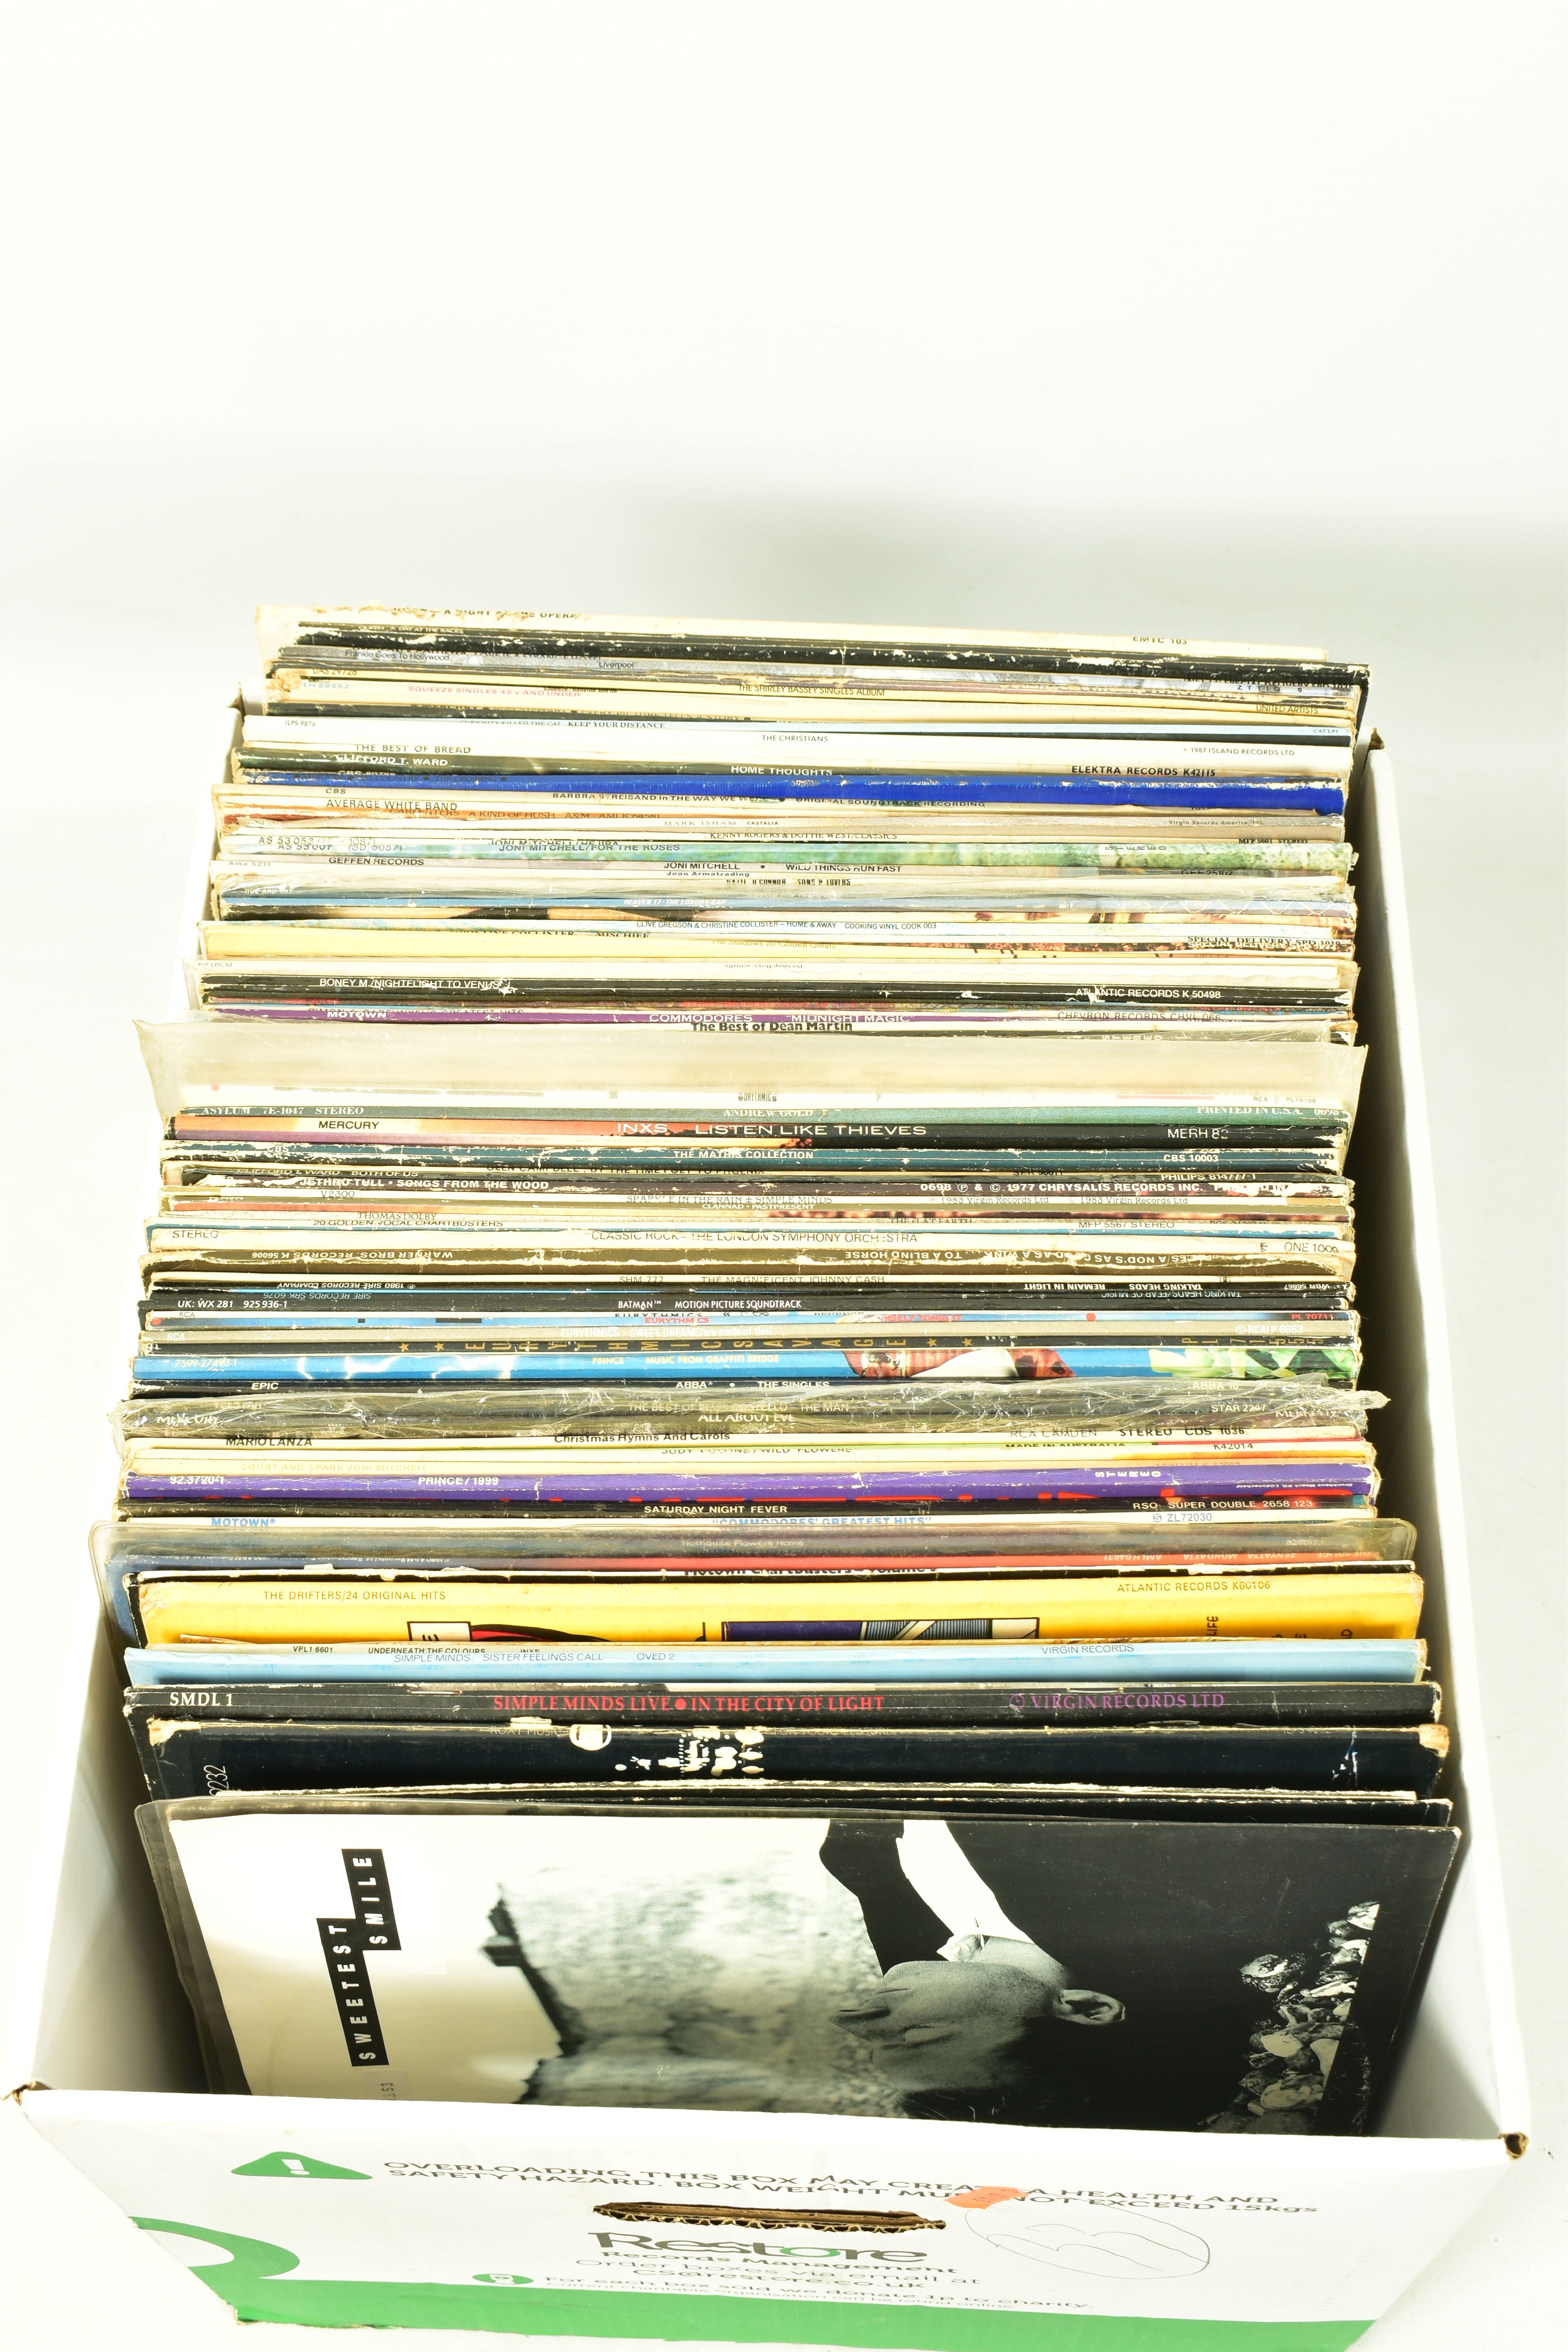 A TRAY CONTAINING APPROX NINETY FIVE LPs AND 12in SINGLES by artists such as Big Country, Joni